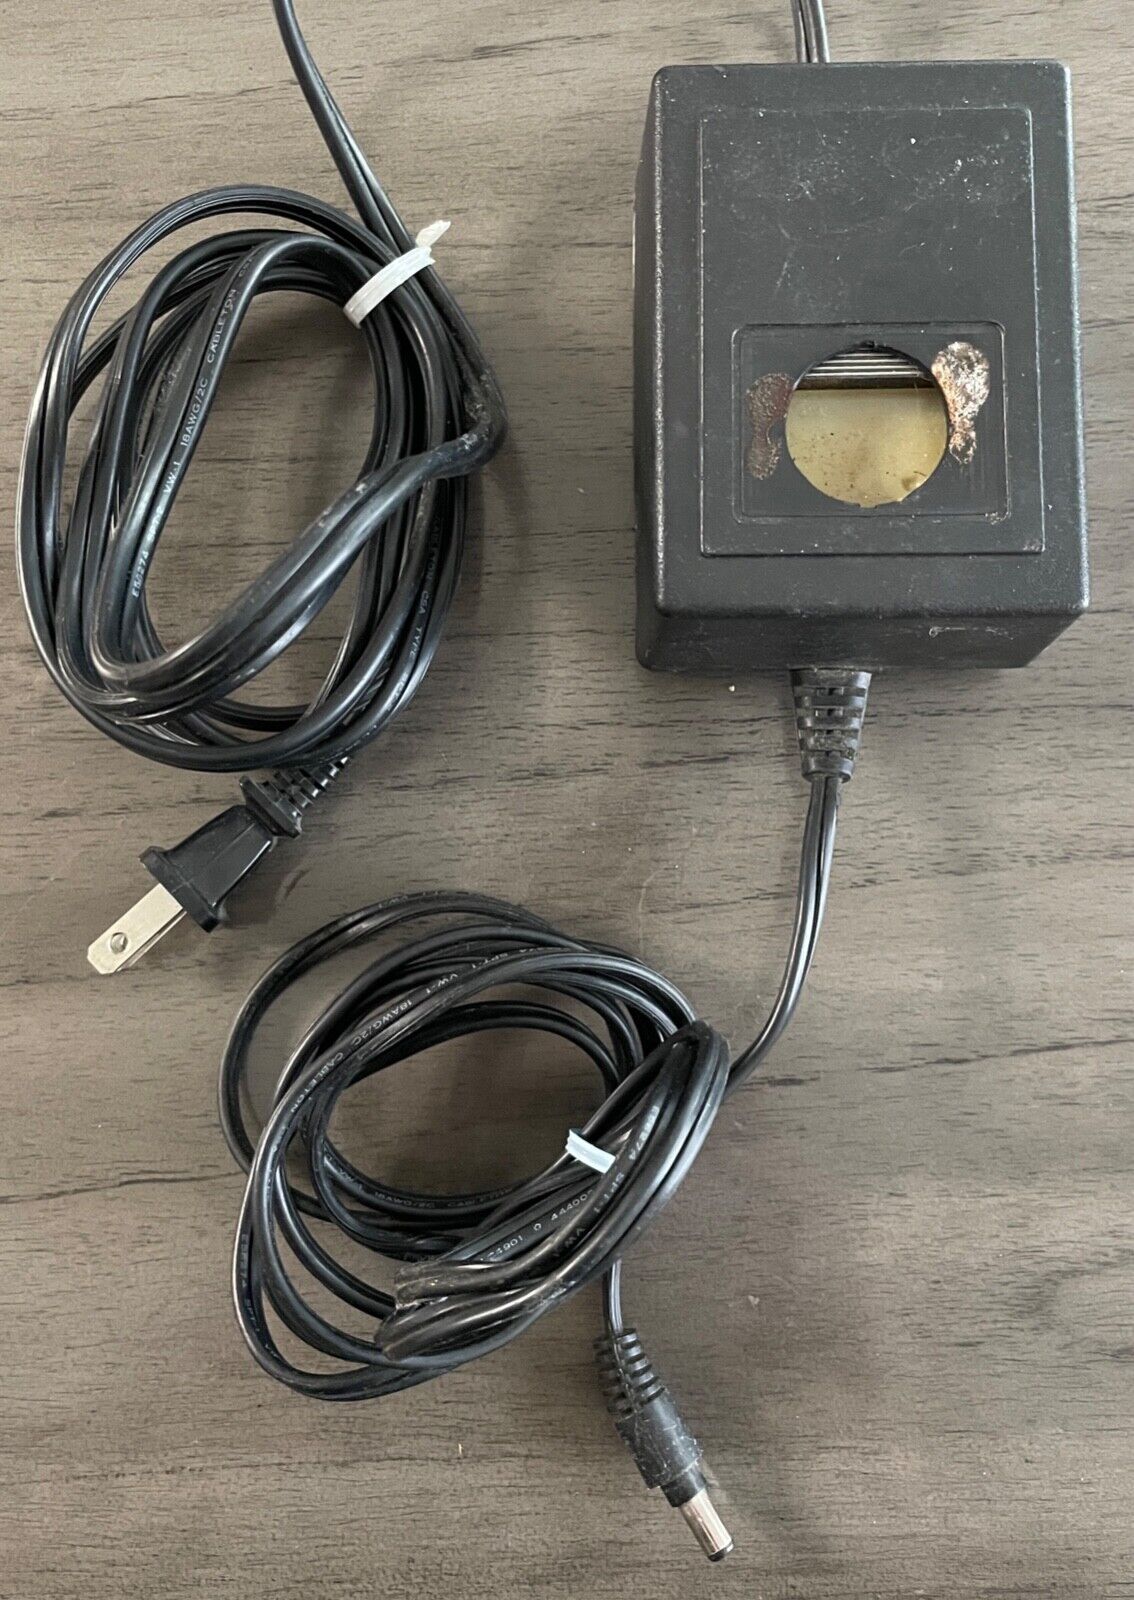 Atari Computer - Indus GT Floppy Disk Drive AC Power Supply Adapter 11.5V 1.95A